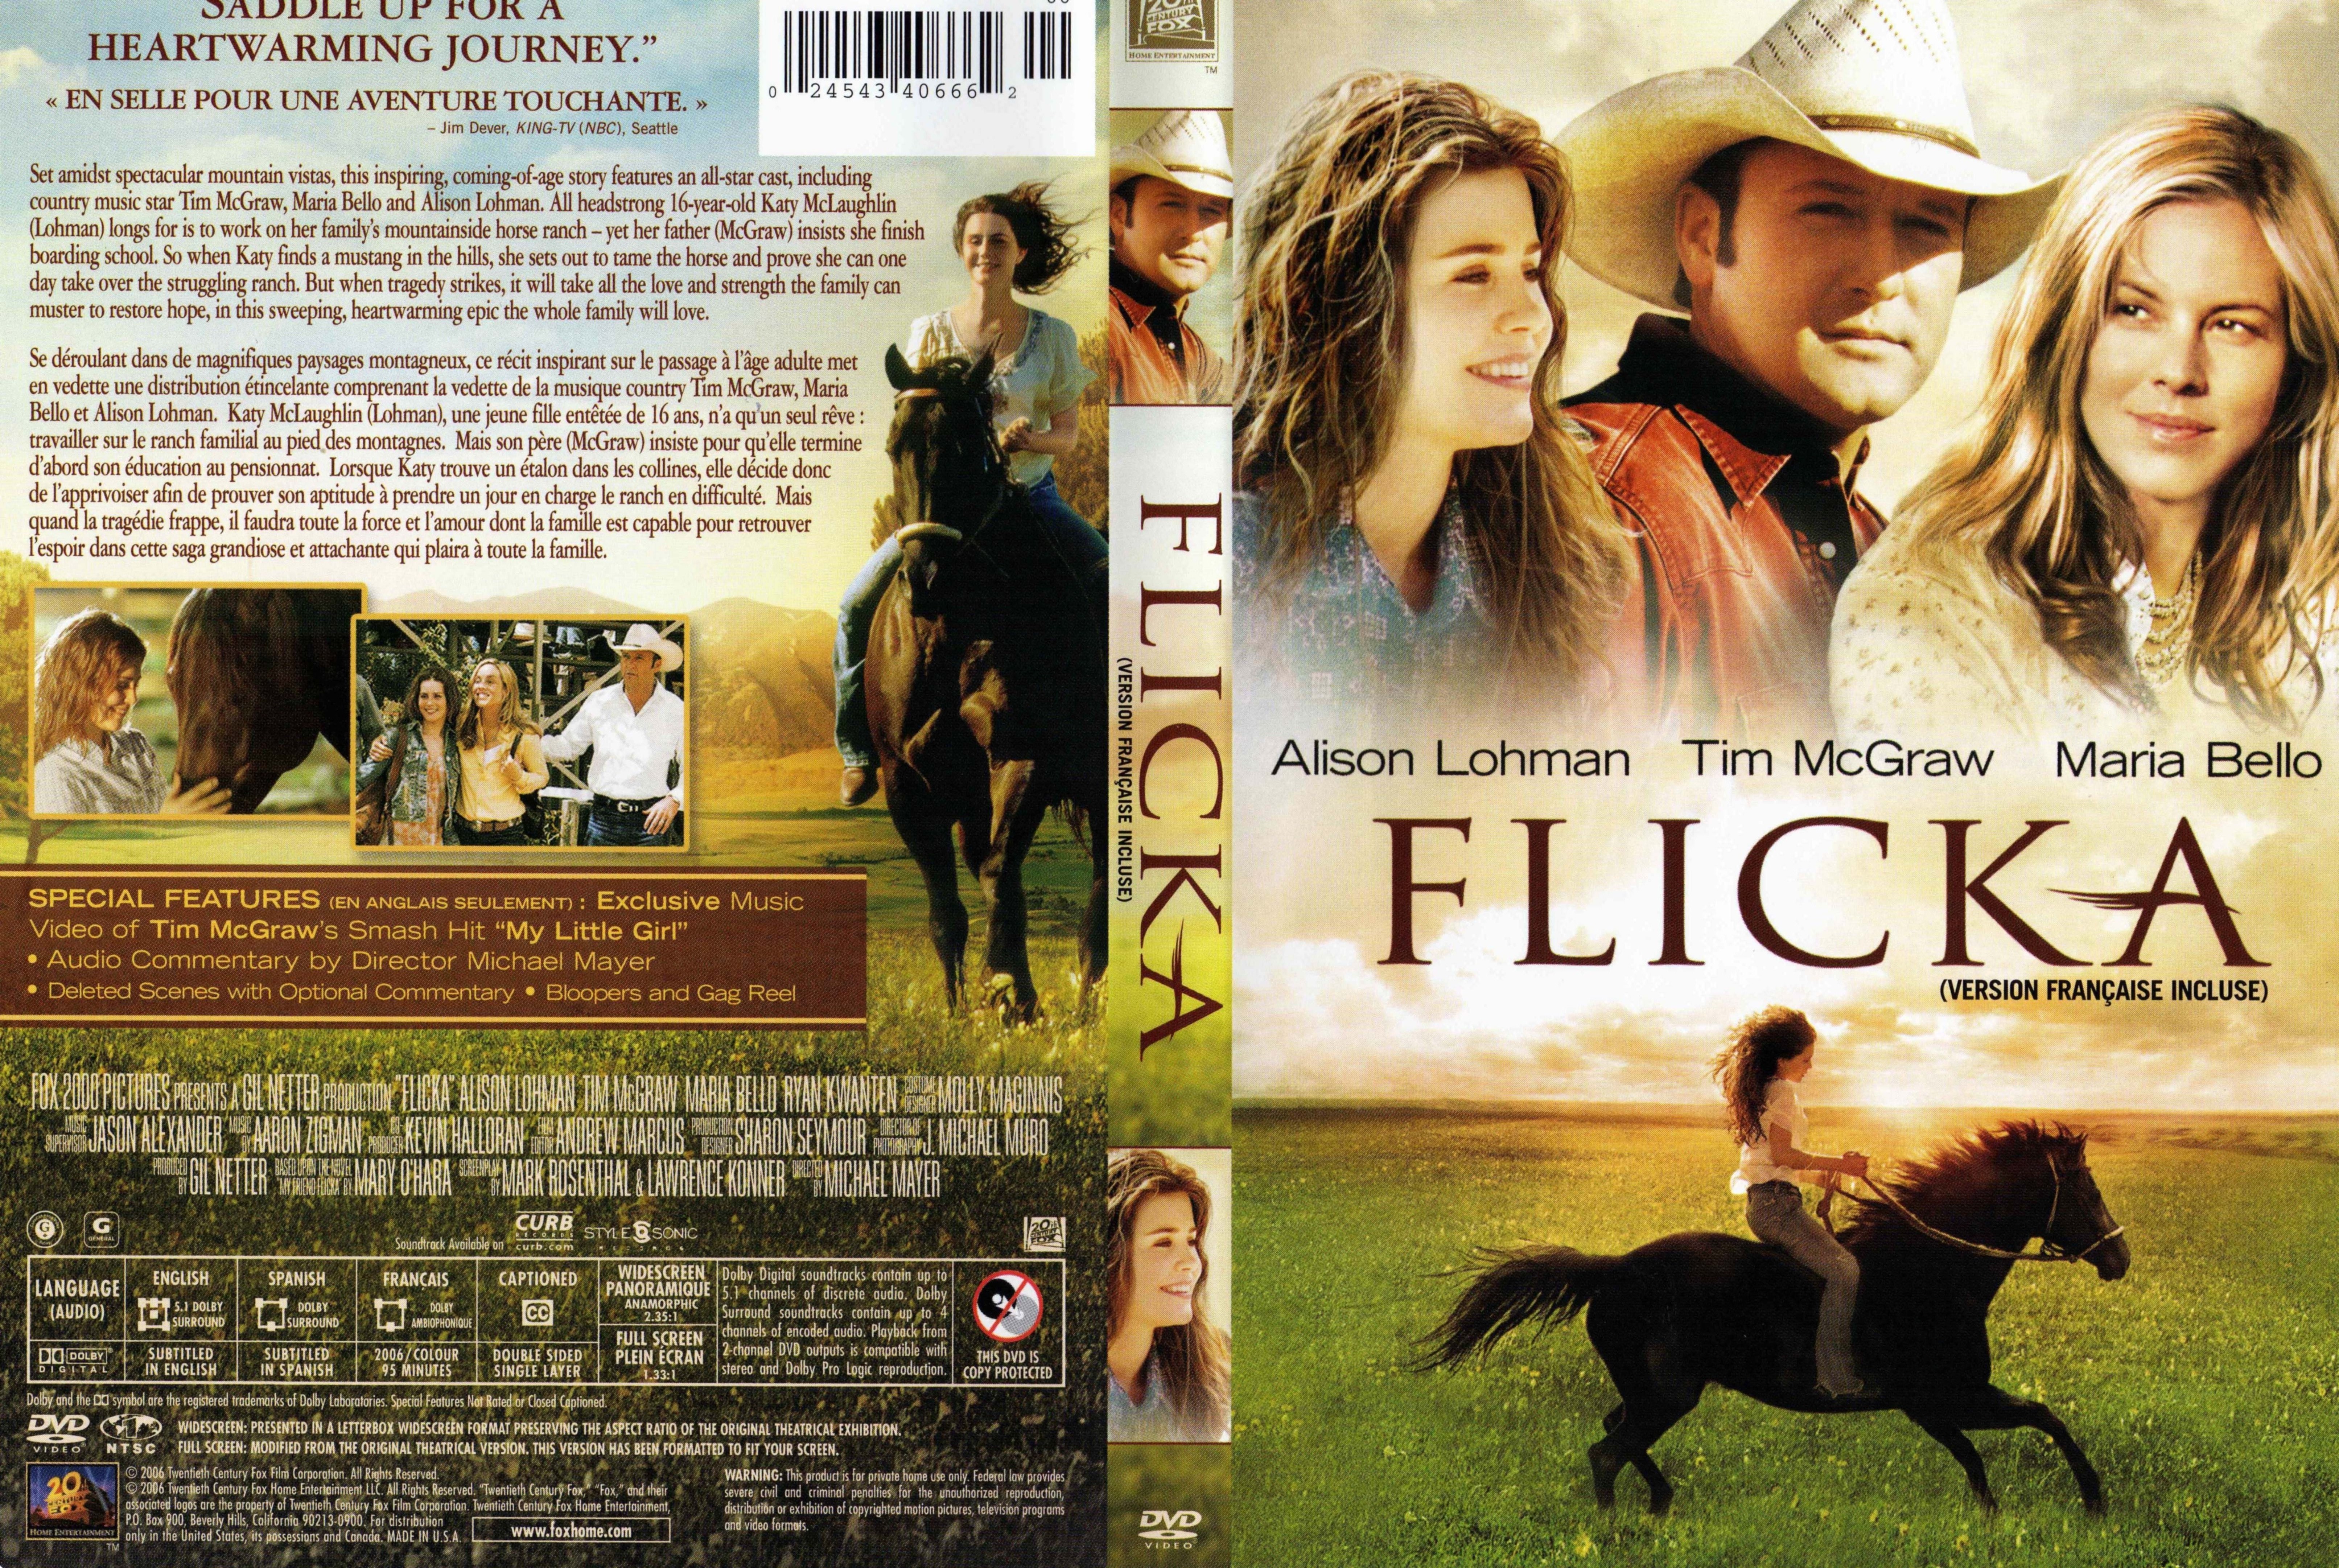 Jaquette DVD Flicka (Canadienne)